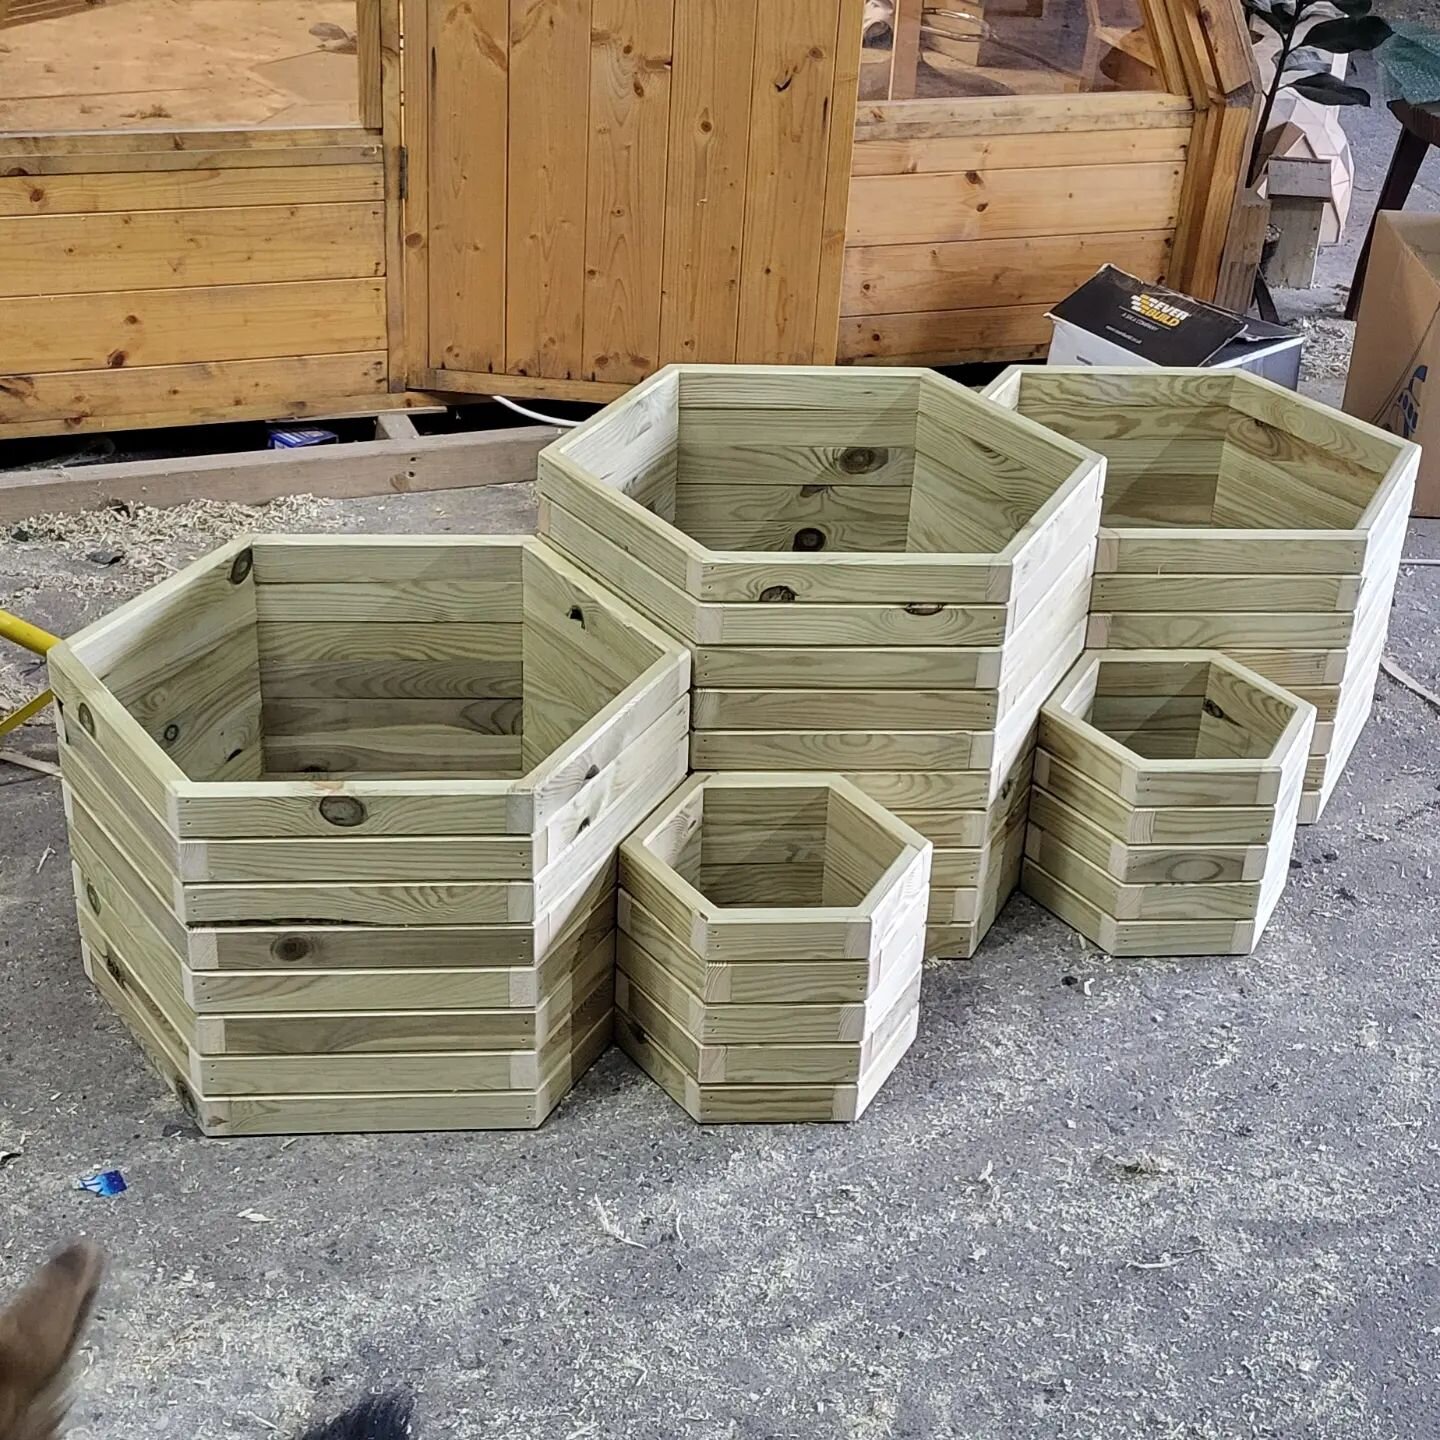 Little side project this evening and something for myself for a change. Still cannot make anything square! Some hexagonal planters for my own garden. Going to try and get it sorted for the summer.

#gardenplanters #plantpot #garden #gardendesign #gar